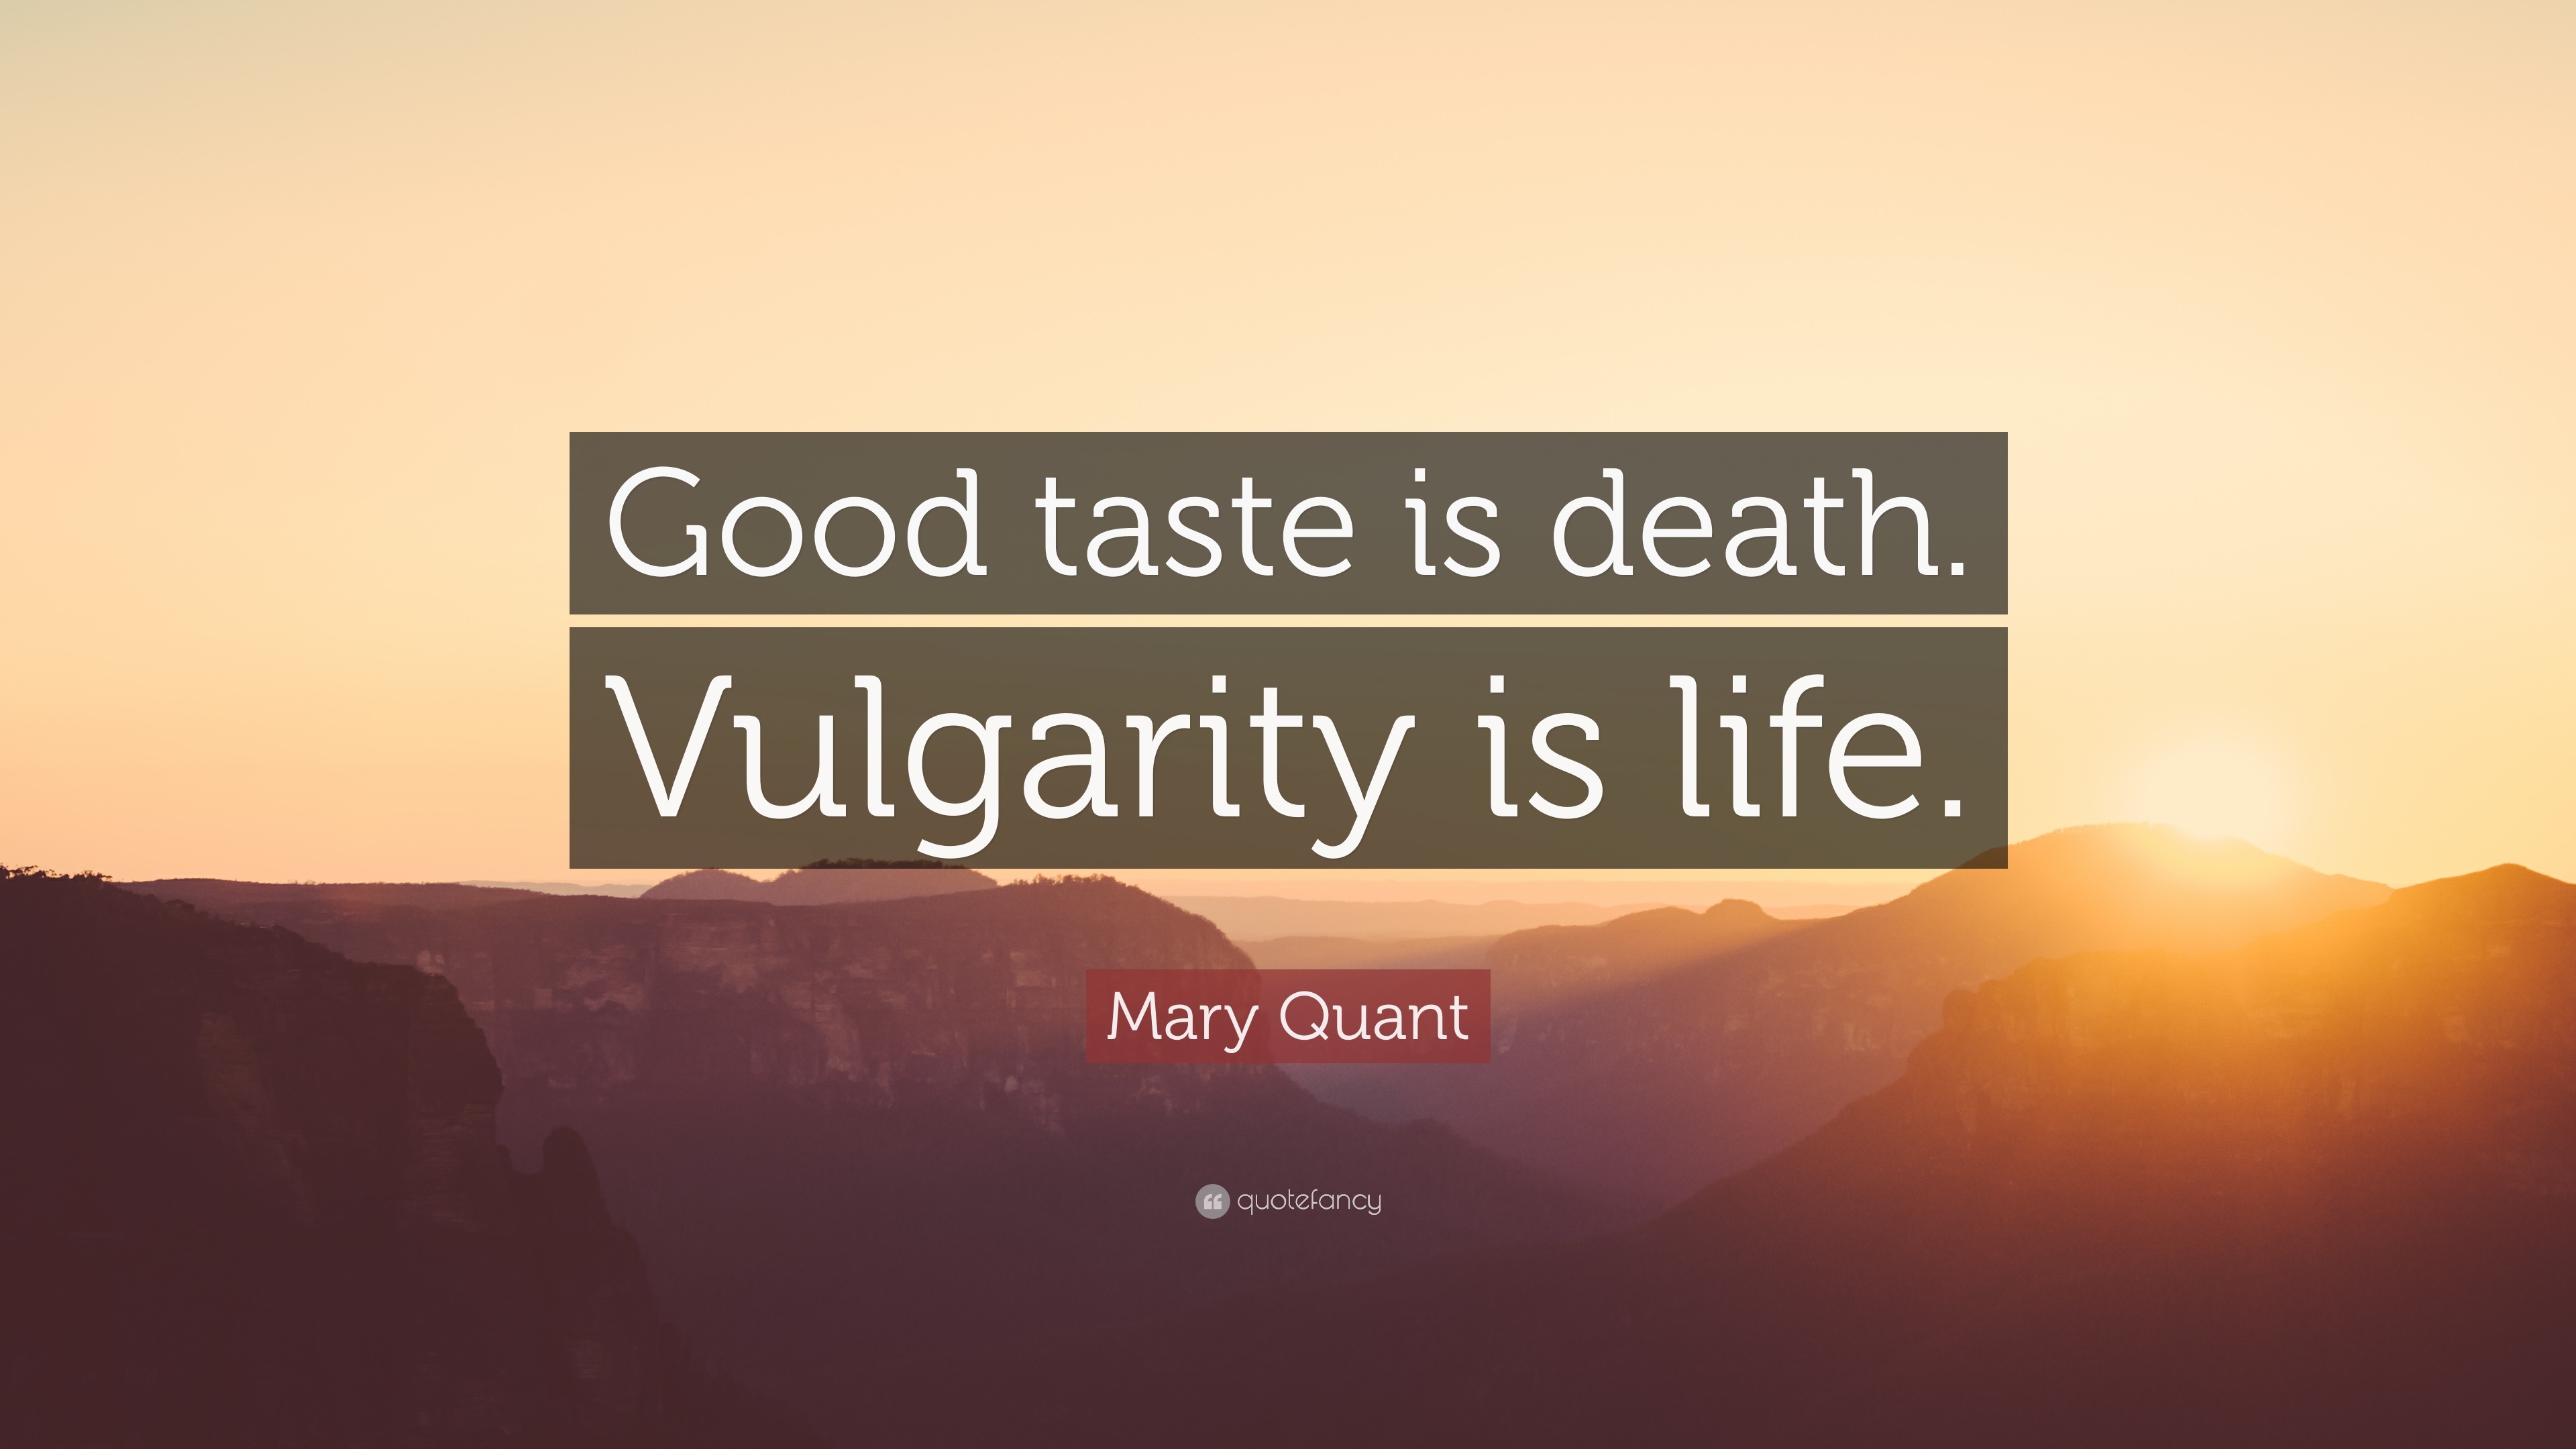 Mary Quant Quote “Good taste is Vulgarity is life ”